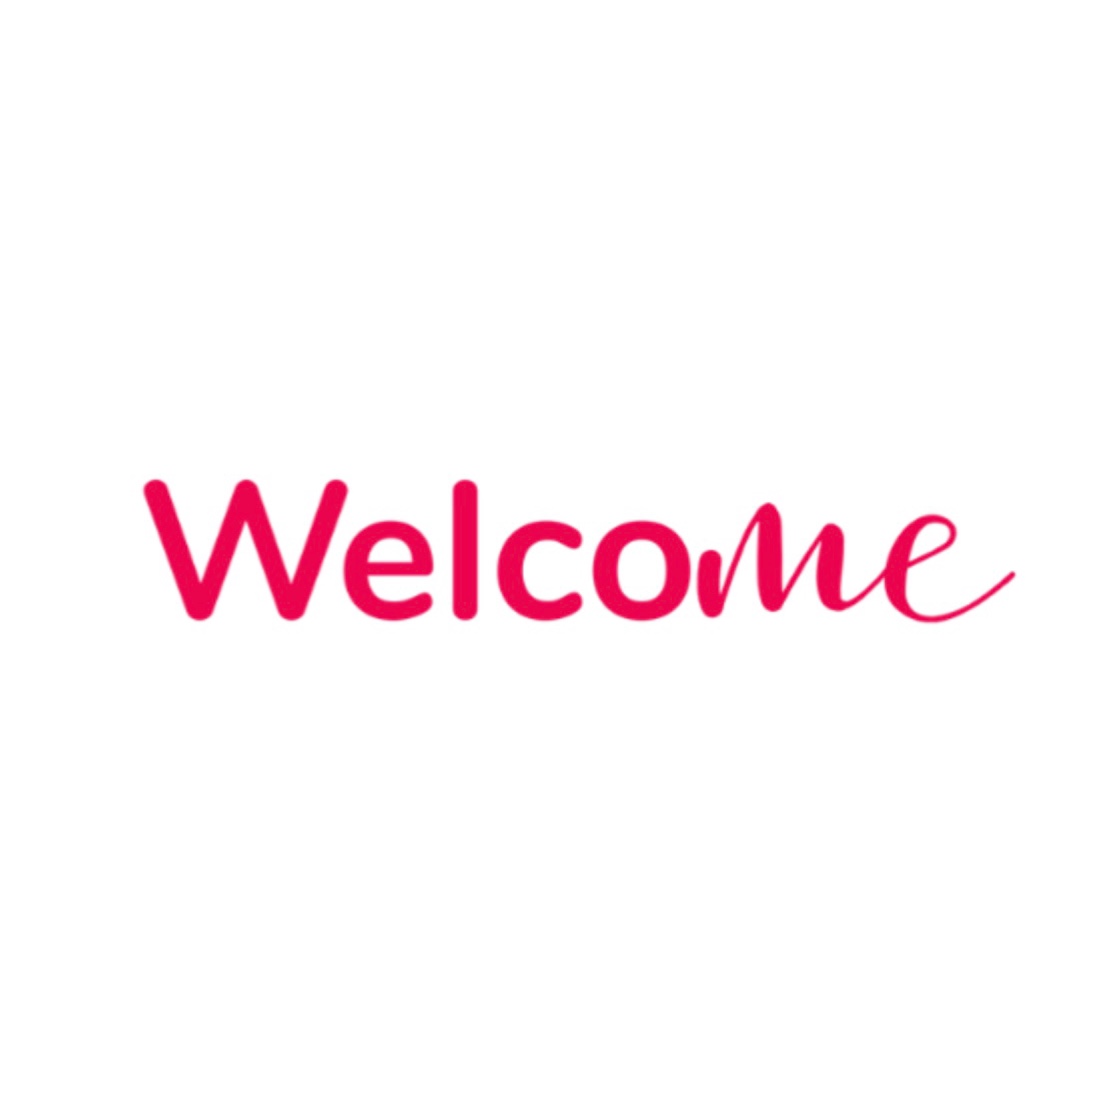 We’re delighted to be one of the tourism businesses that have signed up to accessible online platform, WelcoME, to provide an inclusive welcome for visitors. 😃 ow.ly/Un2l50QCXE1 @destinationNEE @northtyneCA @NGinitiative